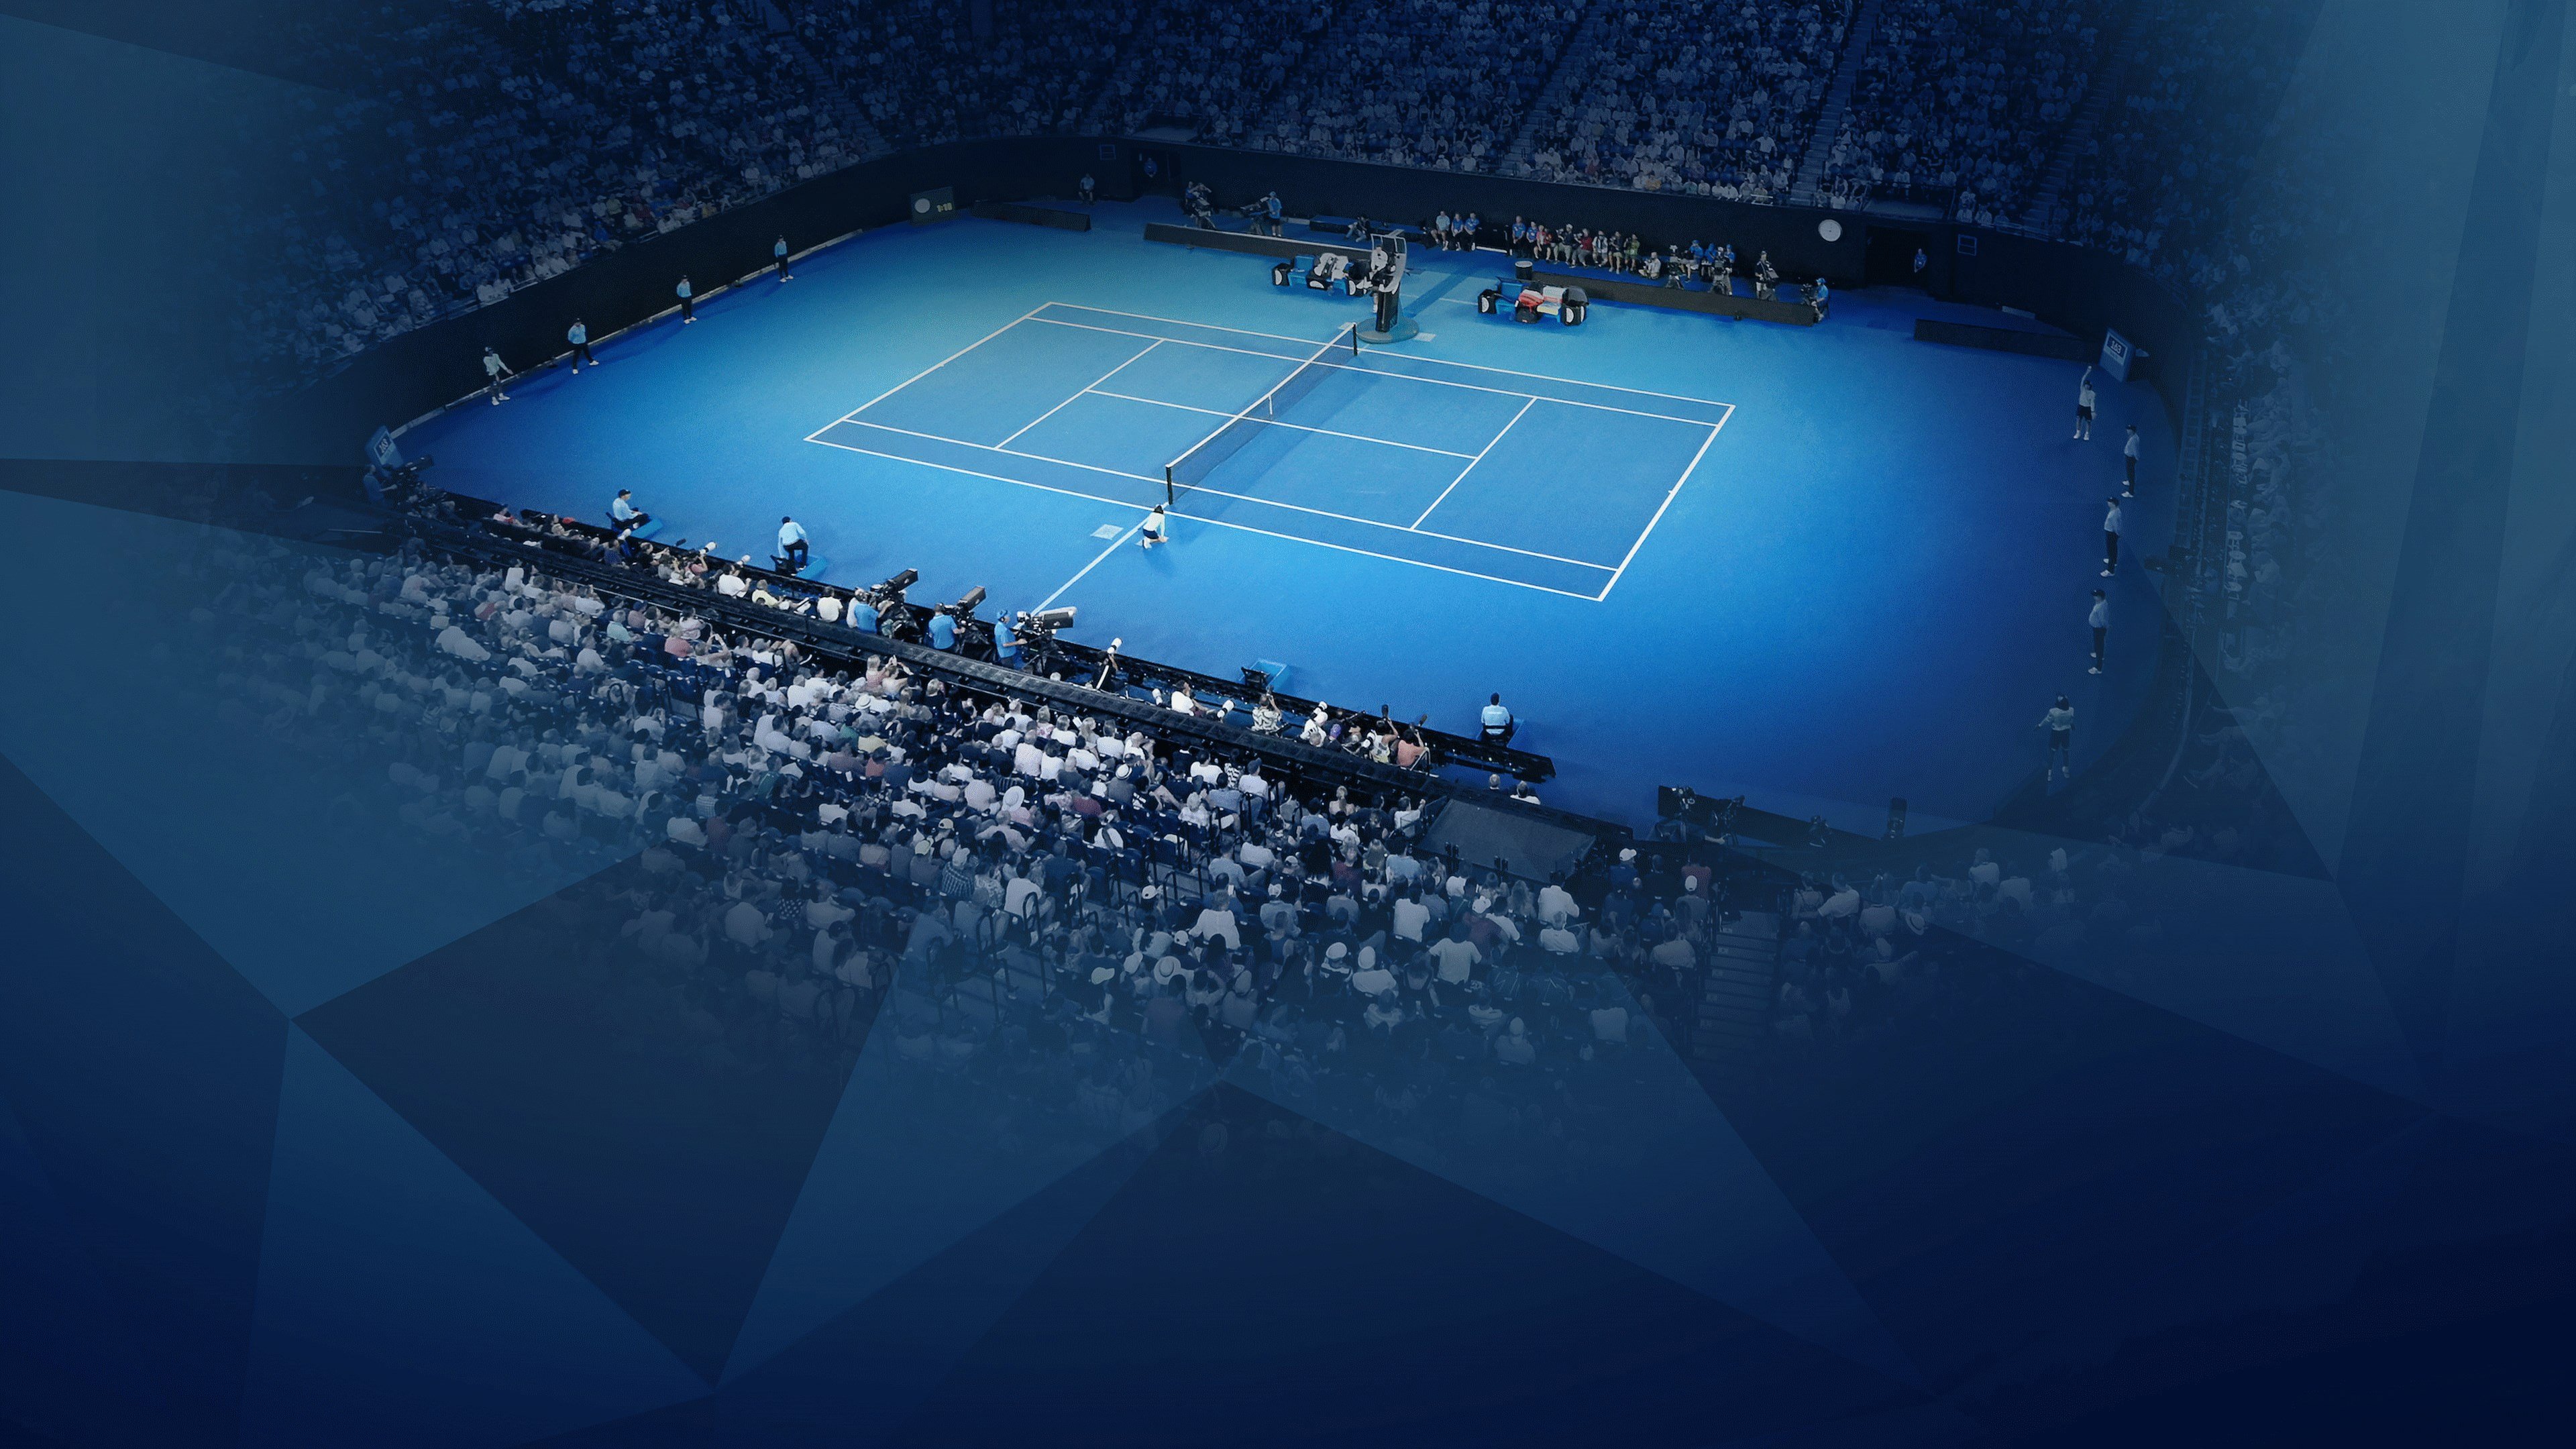 Matchpoint - Tennis Championships cover image